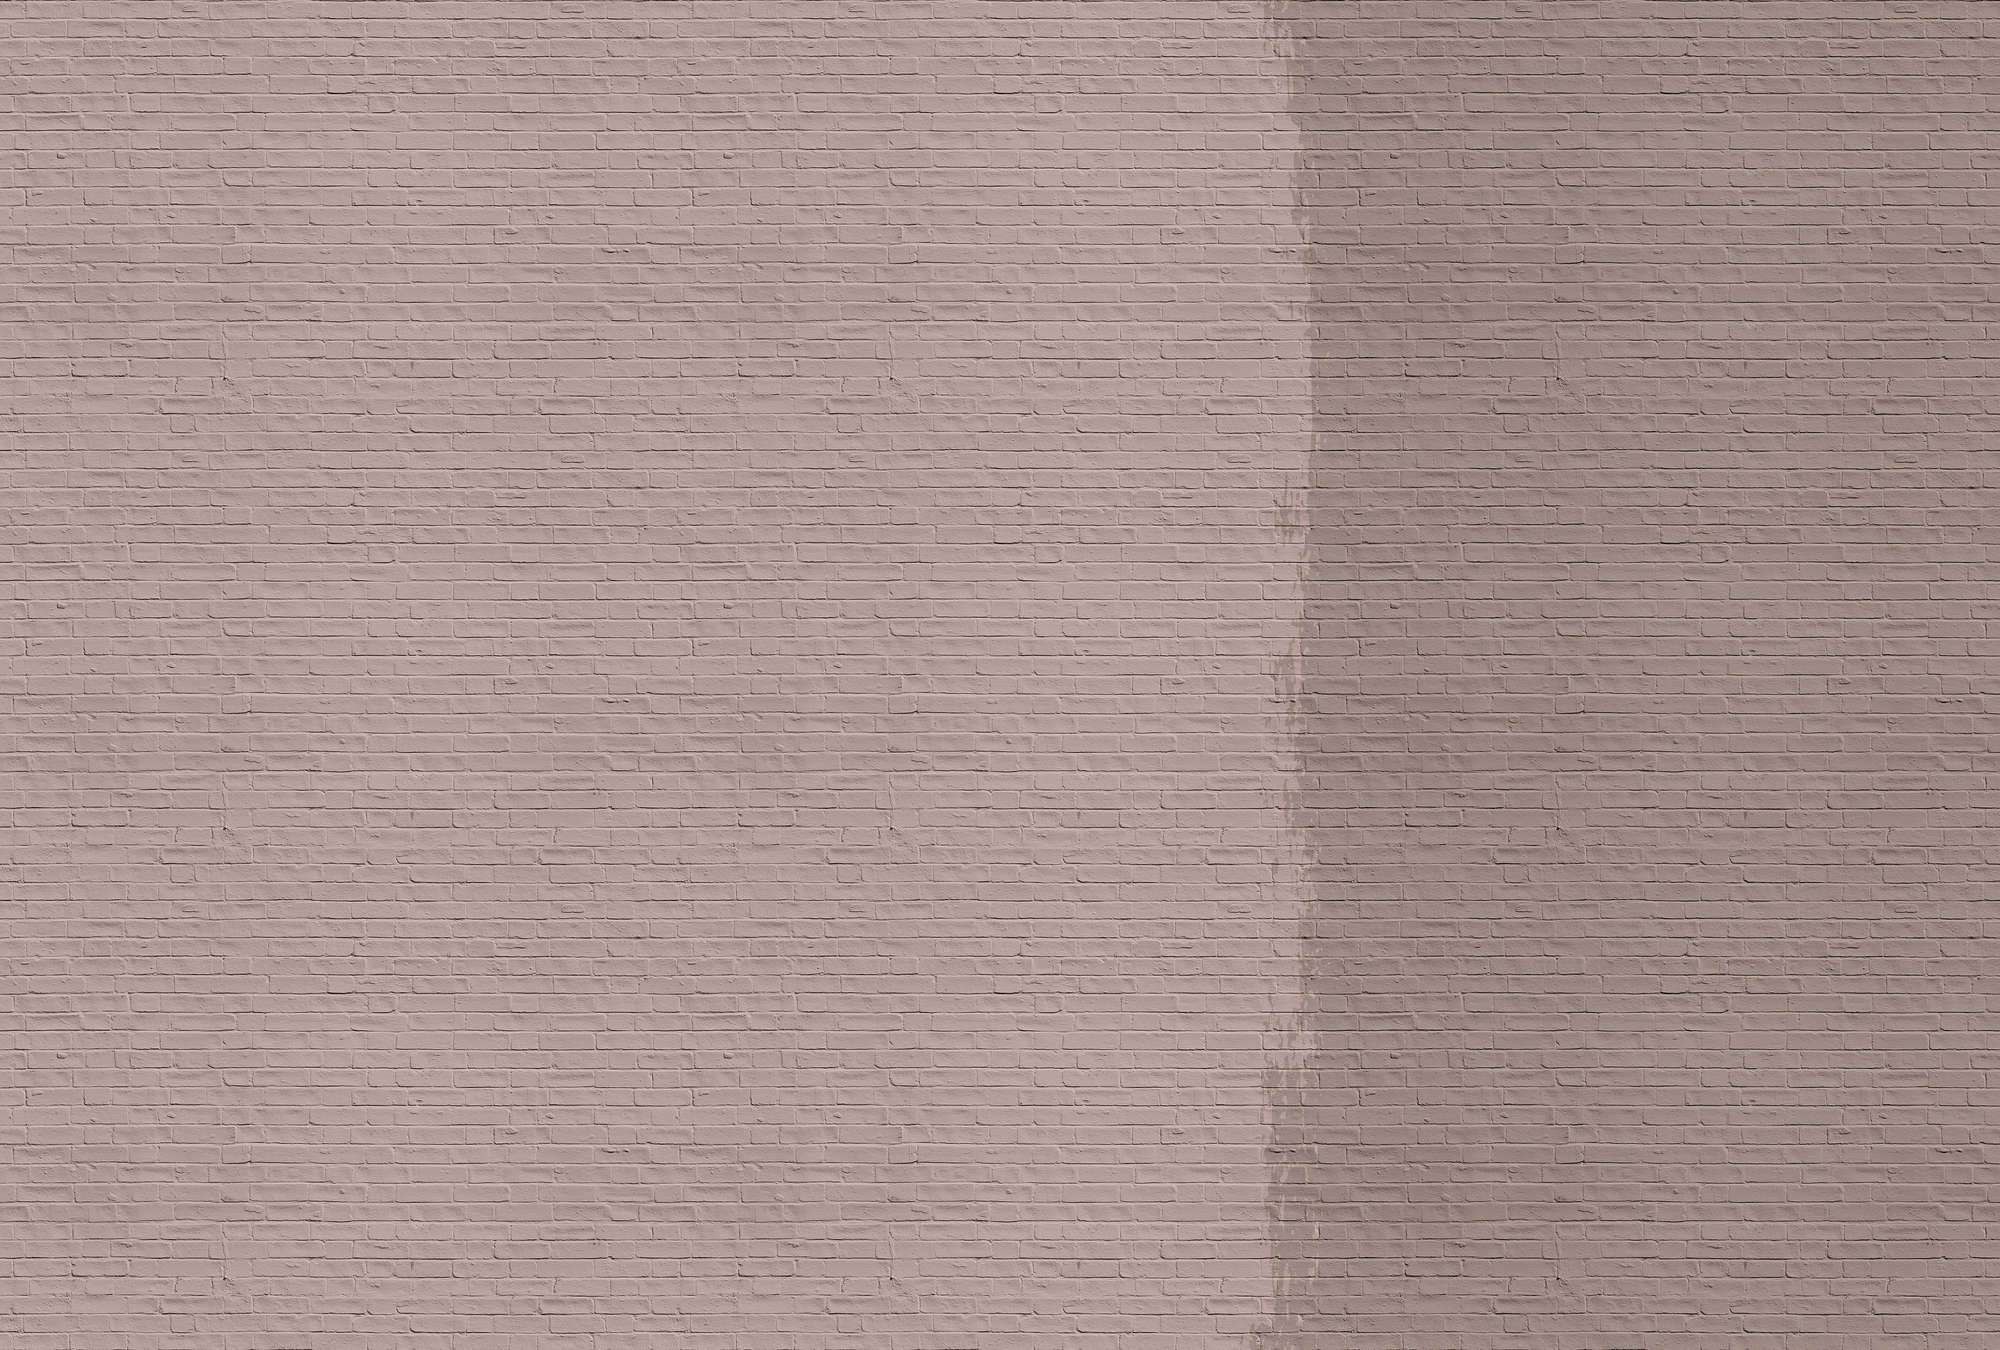             Tainted love 2 - Photo wallpaper with painted brick wall - Pink, Taupe | Texture non-woven
        